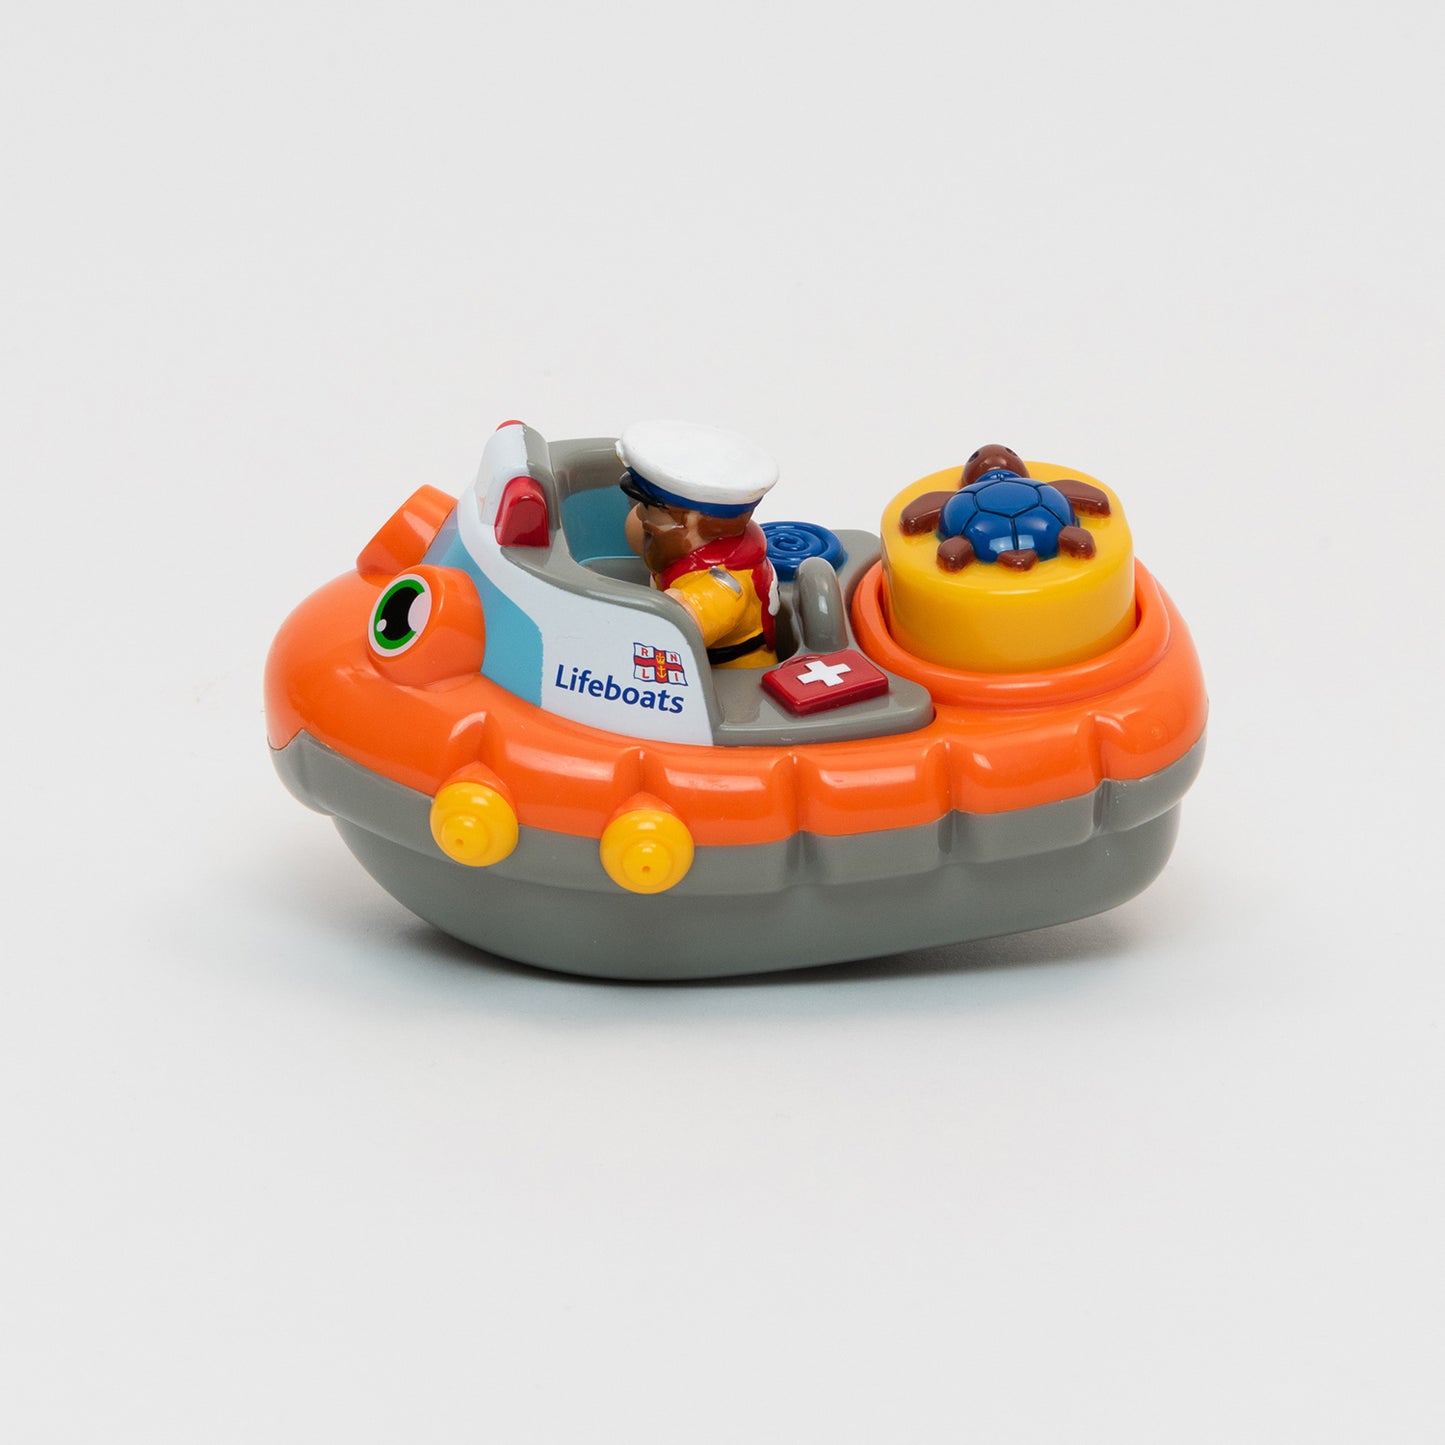 An RNLI lifeboat bath toy with mini lifeboat man figurine. 